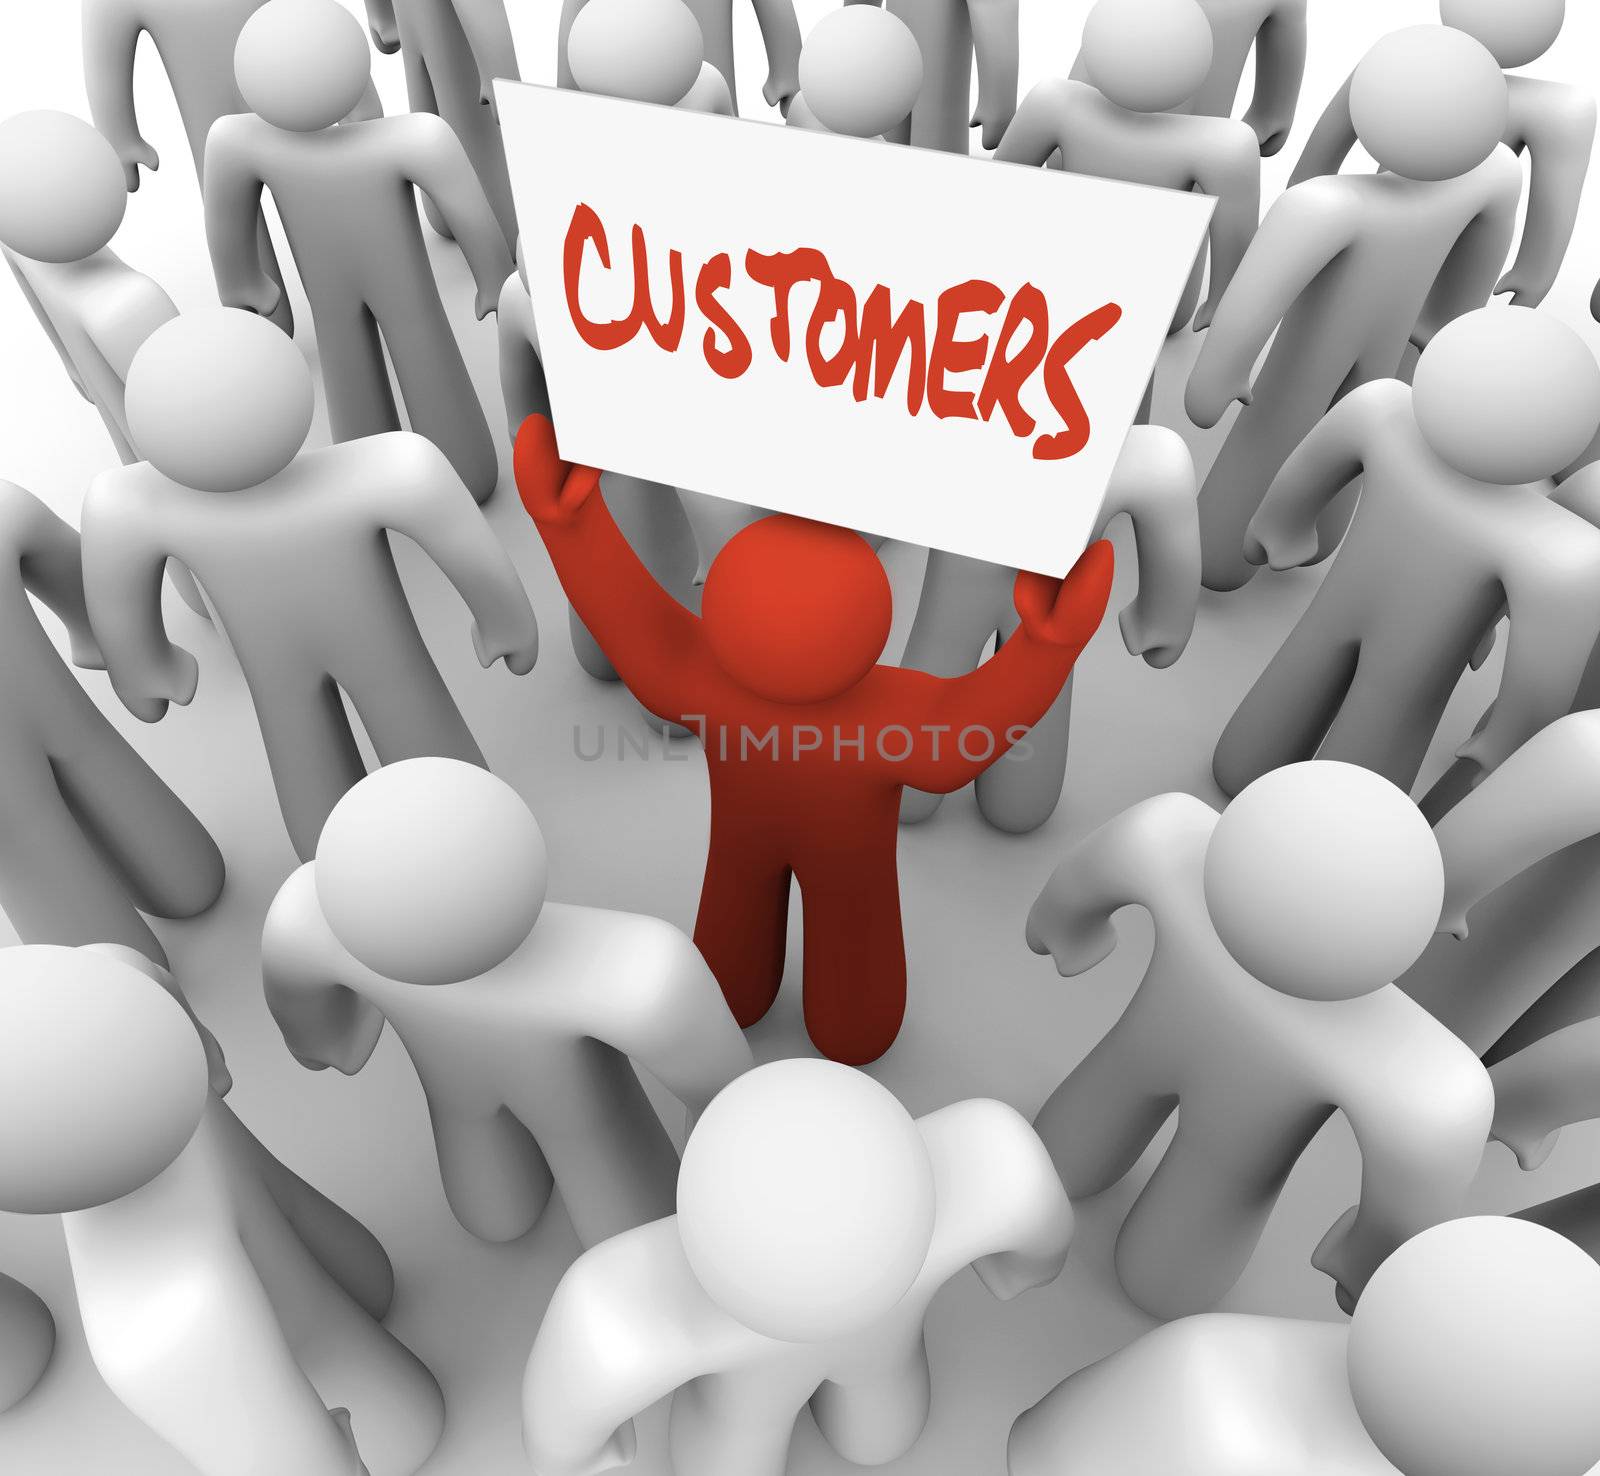 A red person stands out in a crowd holding a sign reading Customers, symbolizing the targeting of consumers in a marketing campaign